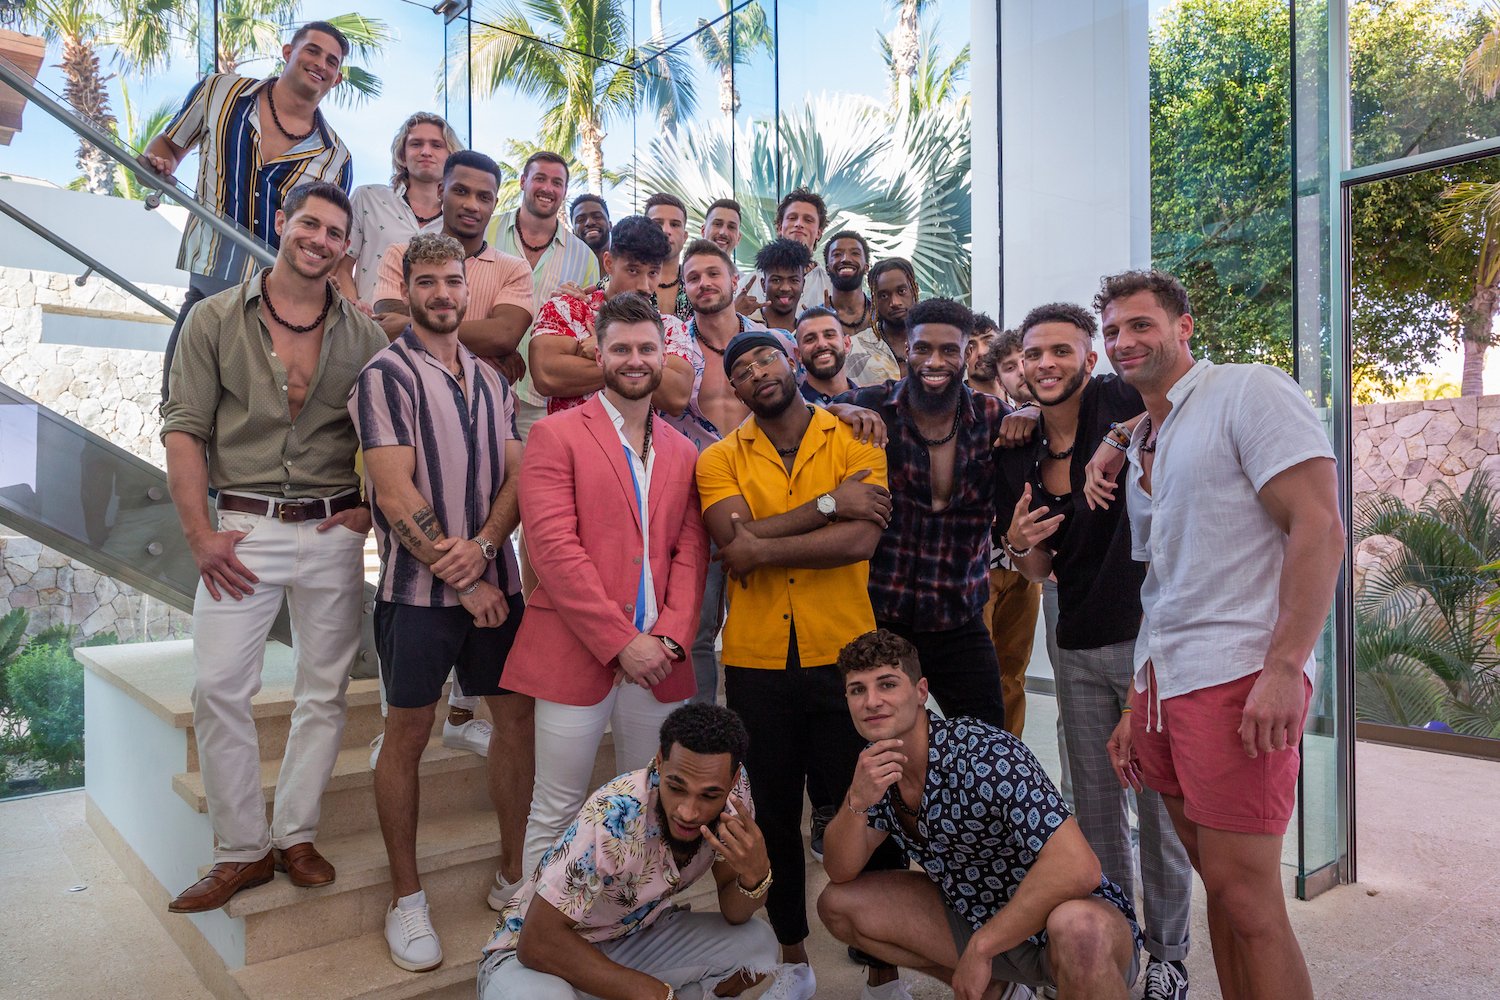 'FBoy Island' Season 2 returns with a new crop of FBoys and Nice Guys, seen here at the ladies' mansion.